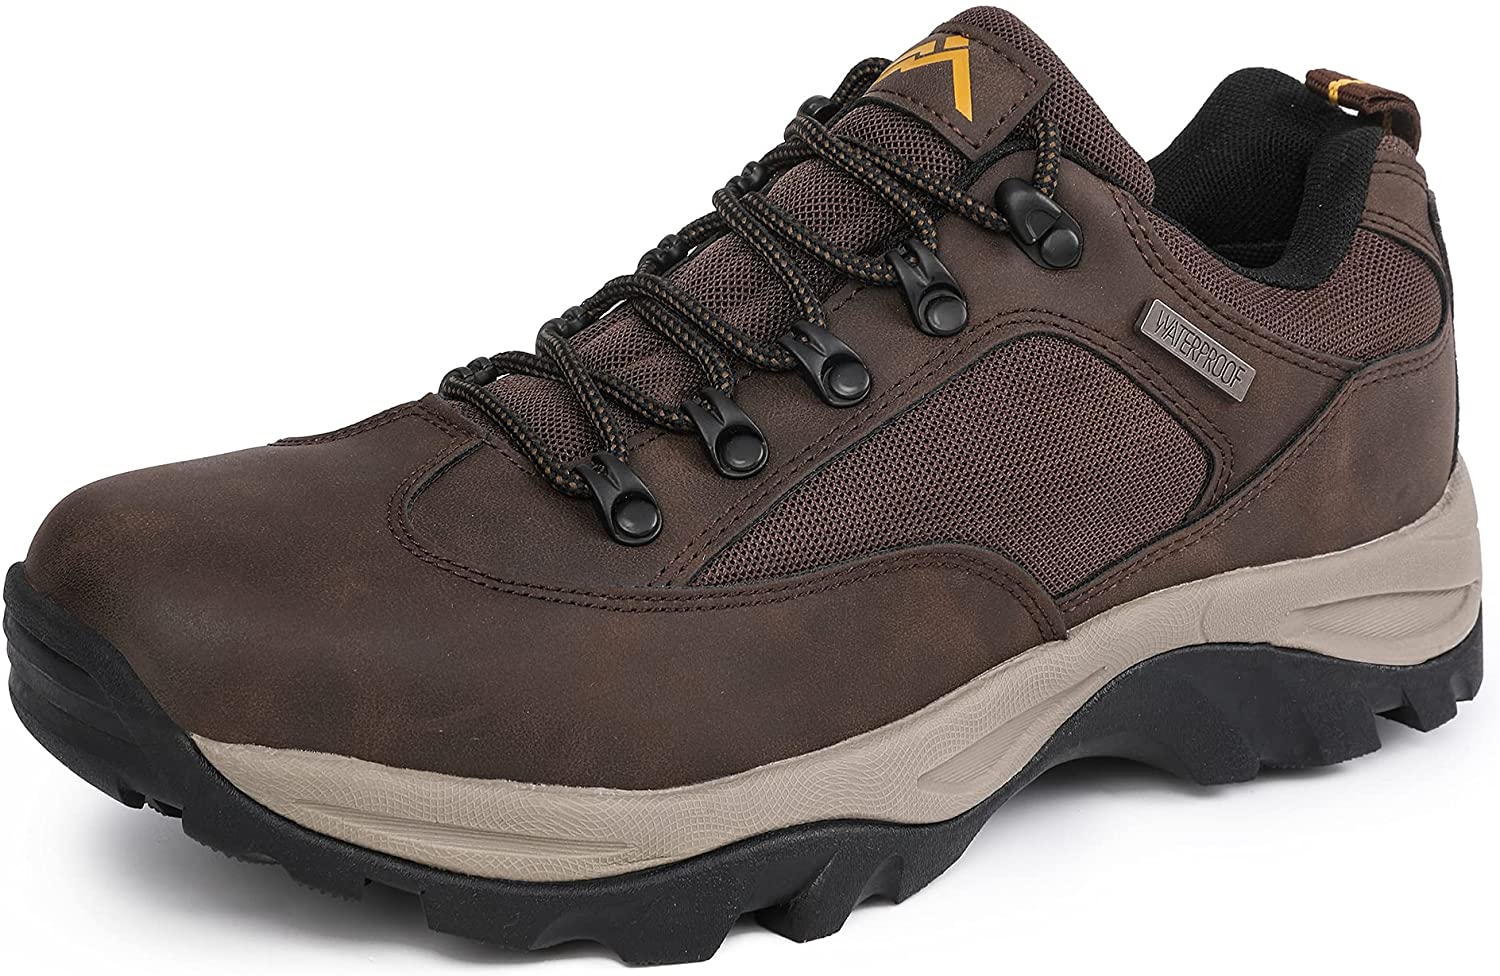 CC-Los Men's Waterproof Hiking Boots Work Boots Lightweight & All Day Comfort 